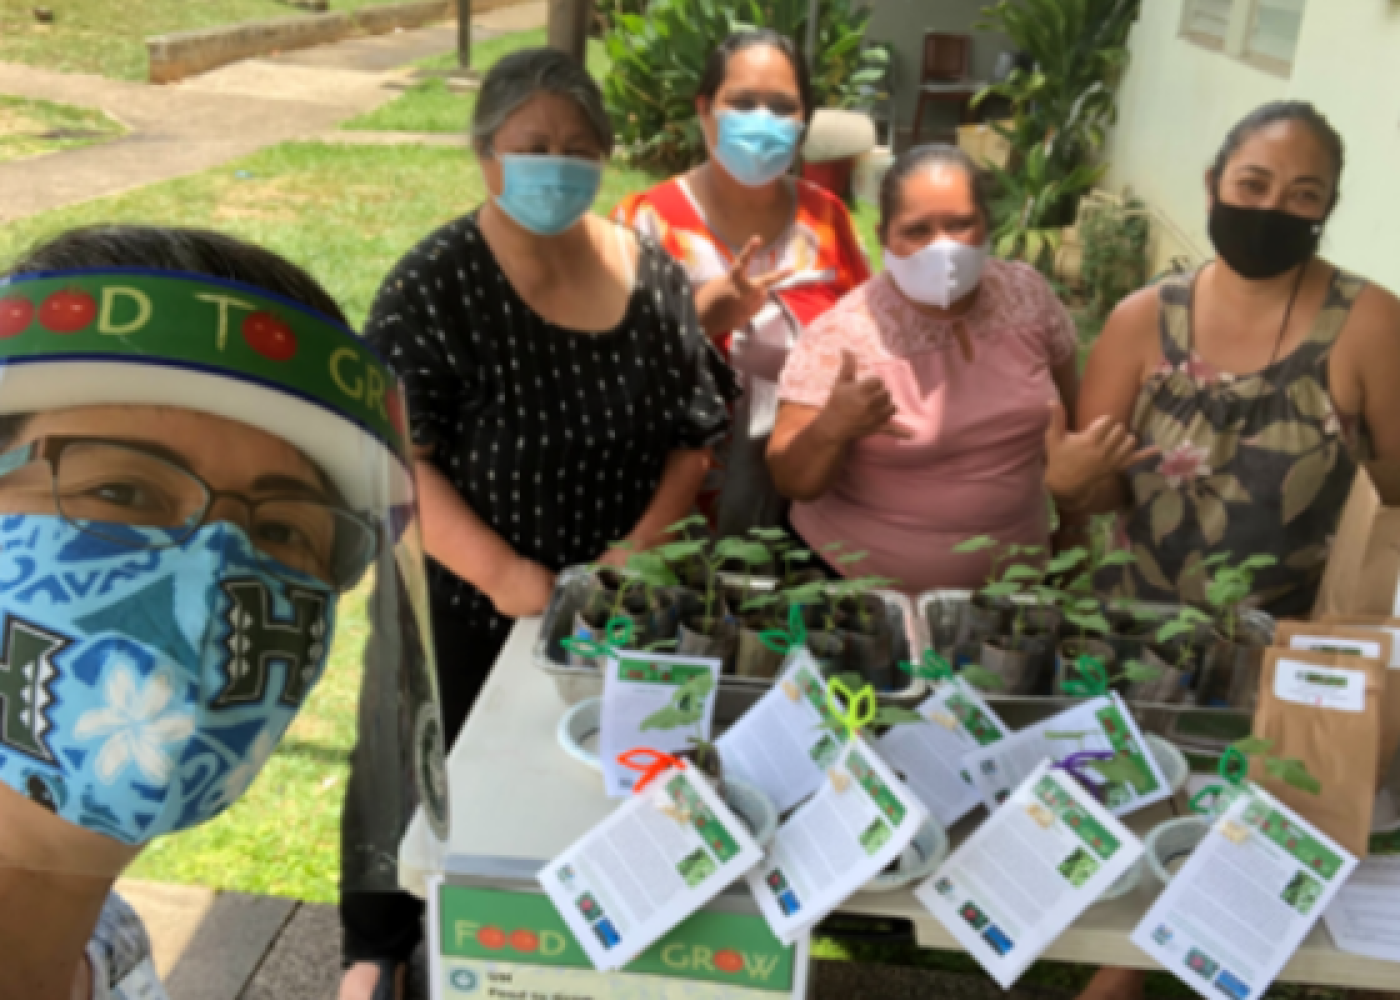 4 women standing behind their table of started vegetable plants with an educator in a "Food to Grow" COVID mask.